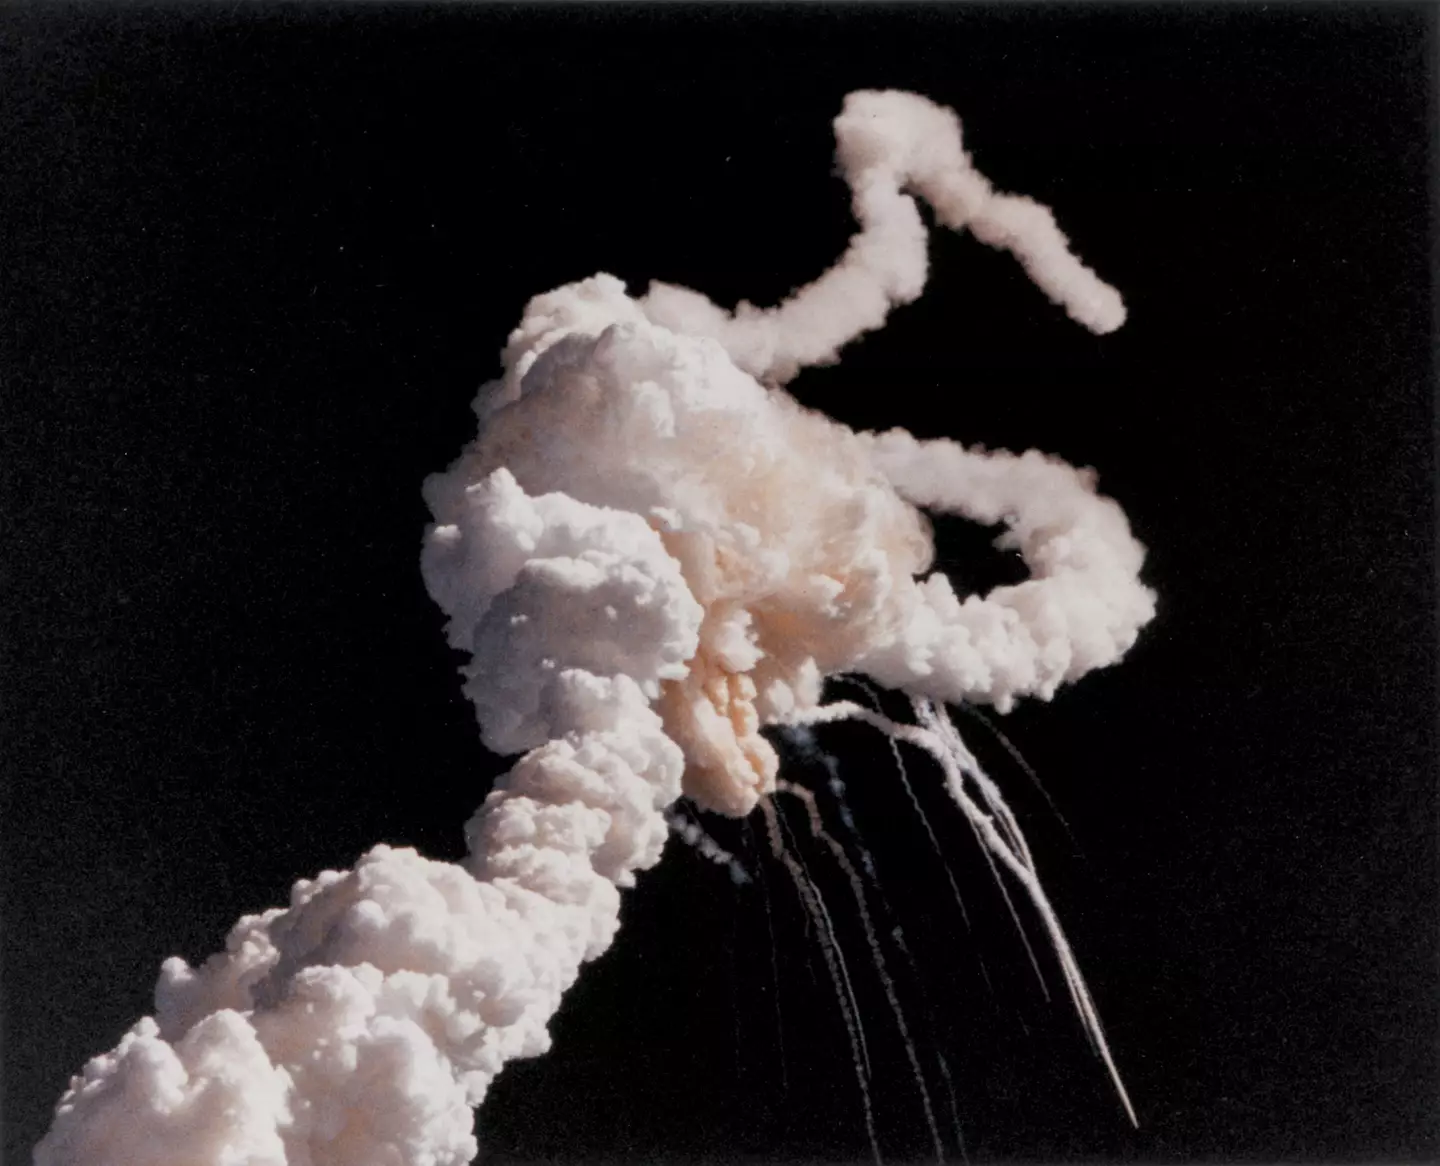 The Challenger space shuttle was destroyed with all seven crew members on board dying.